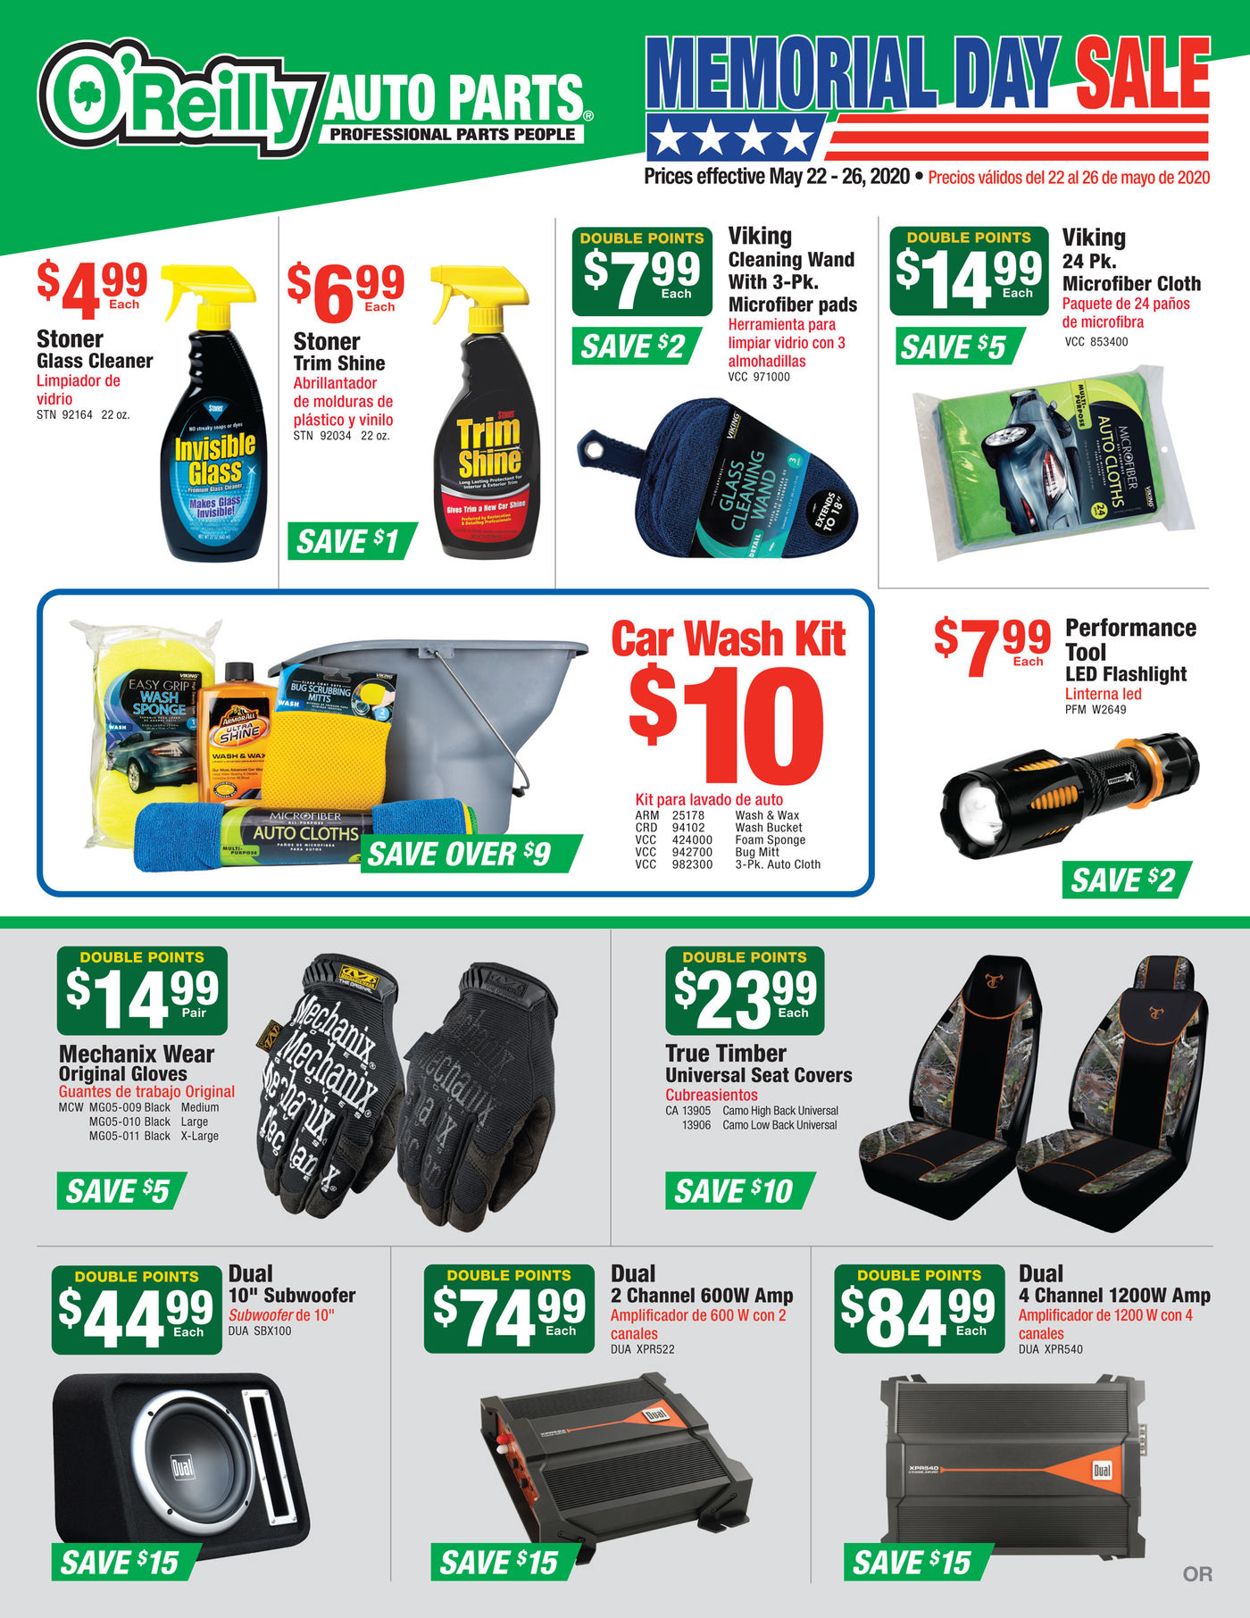 O'Reilly Auto Parts Current weekly ad 05/22 - 05/26/2020 [2] - frequent ...